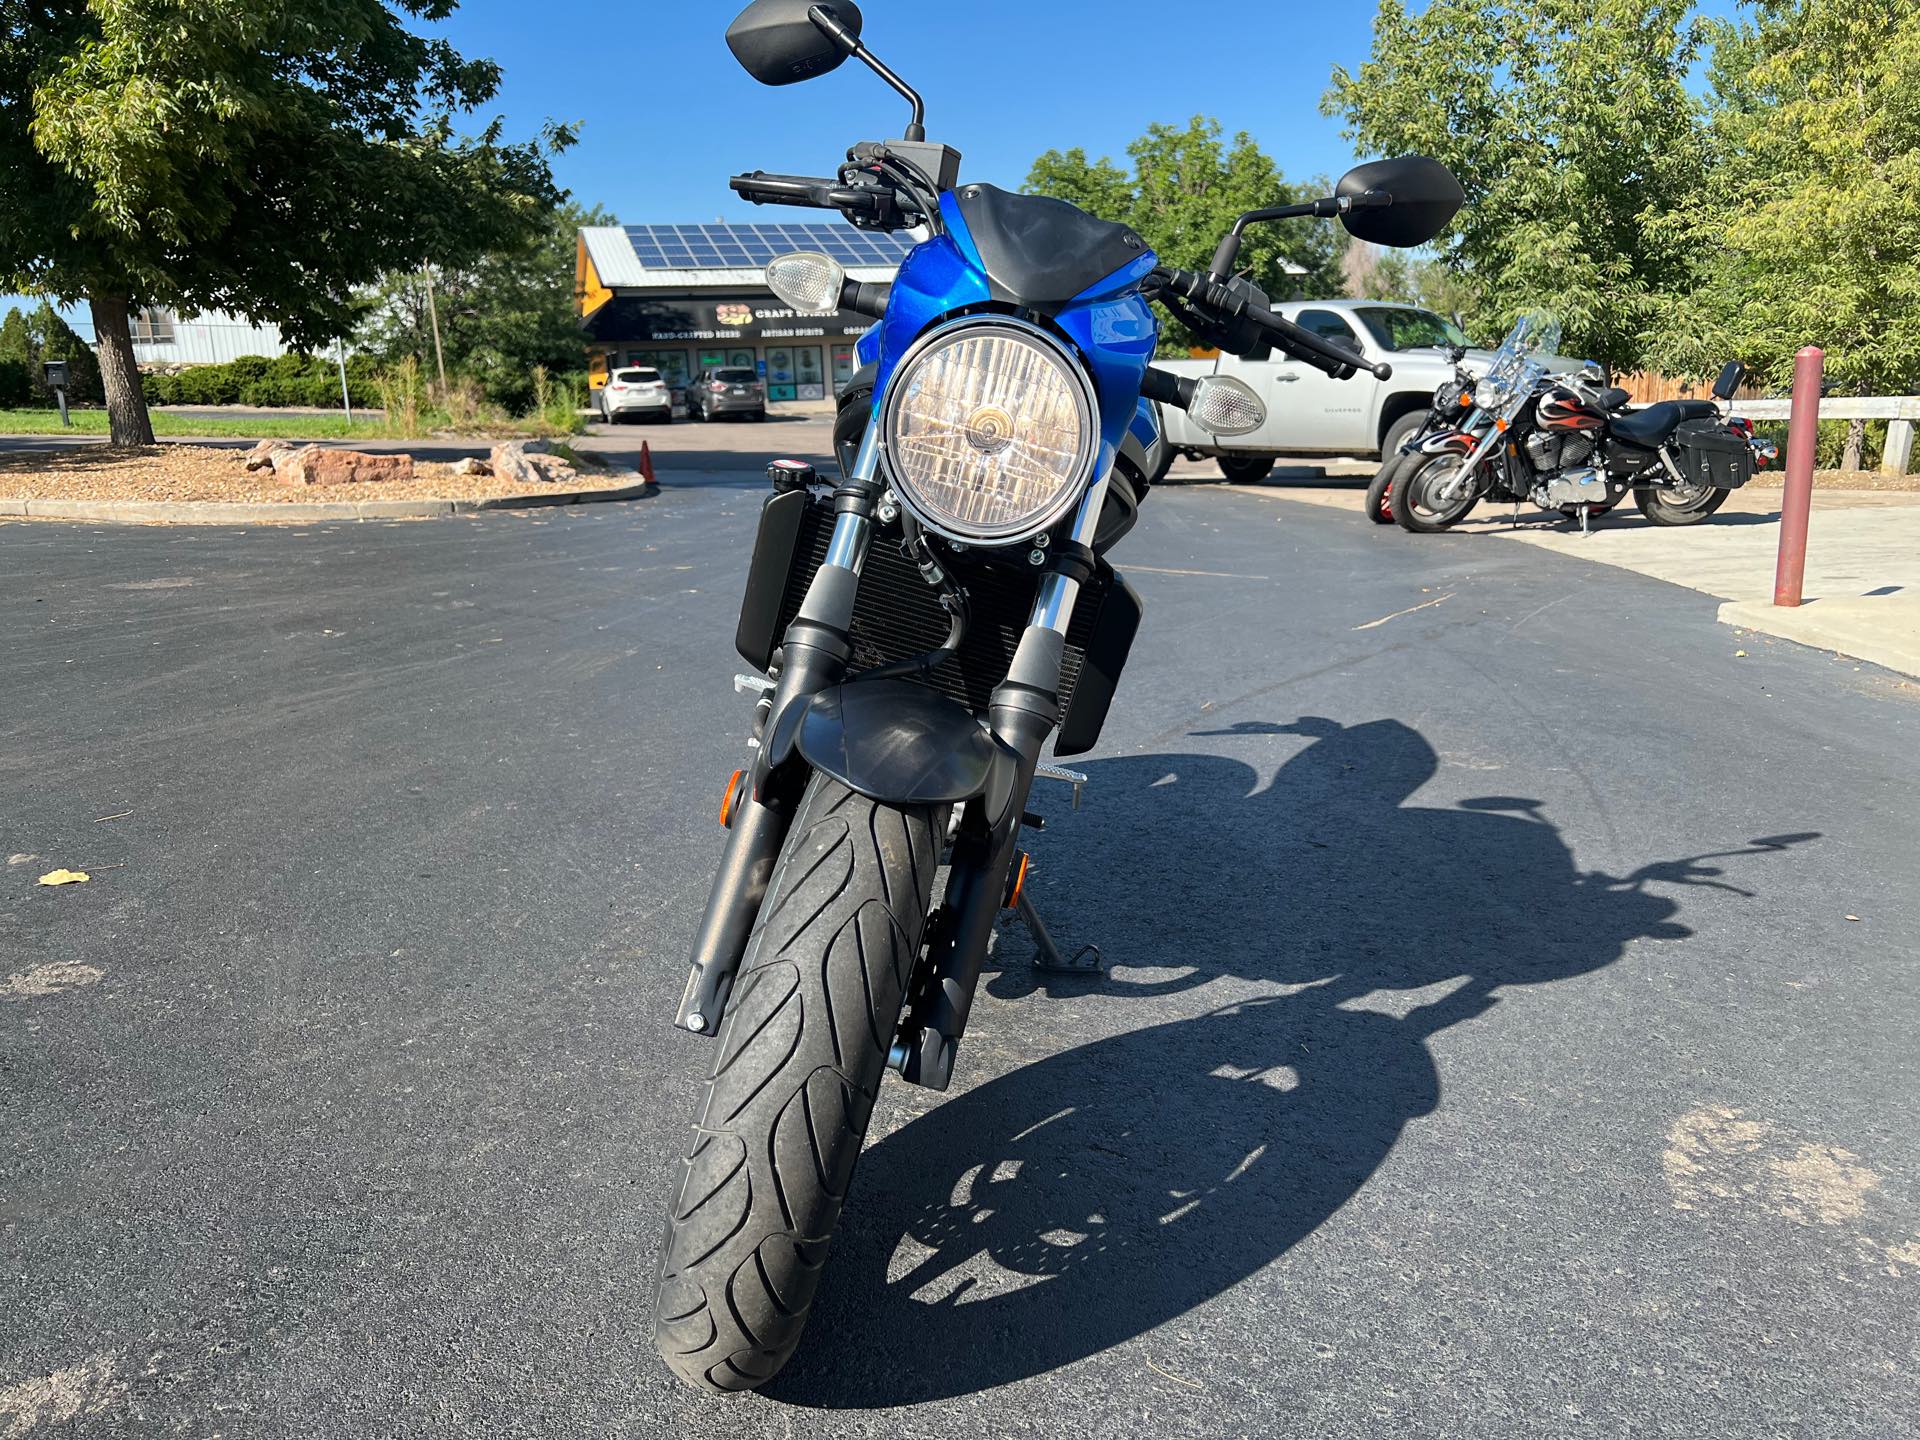 2018 Suzuki SV 650 at Aces Motorcycles - Fort Collins